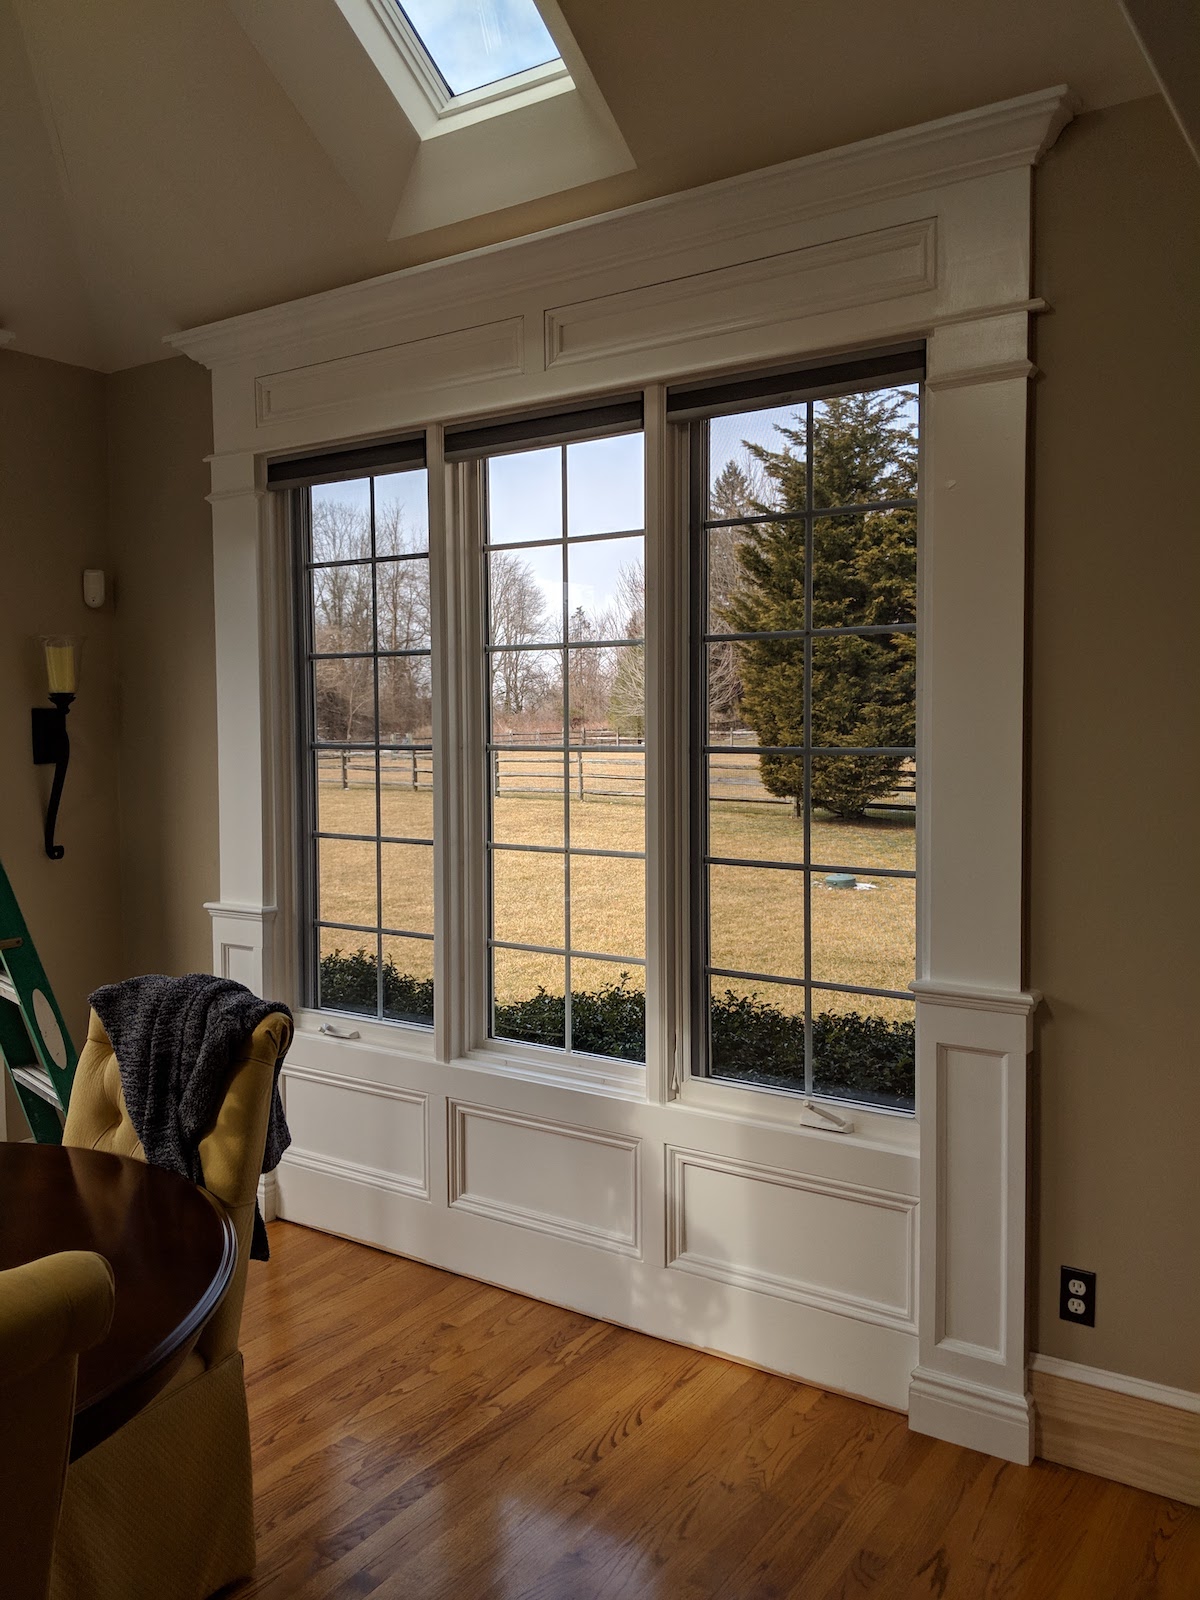 Panelled pilasters used to frame large window in dining room